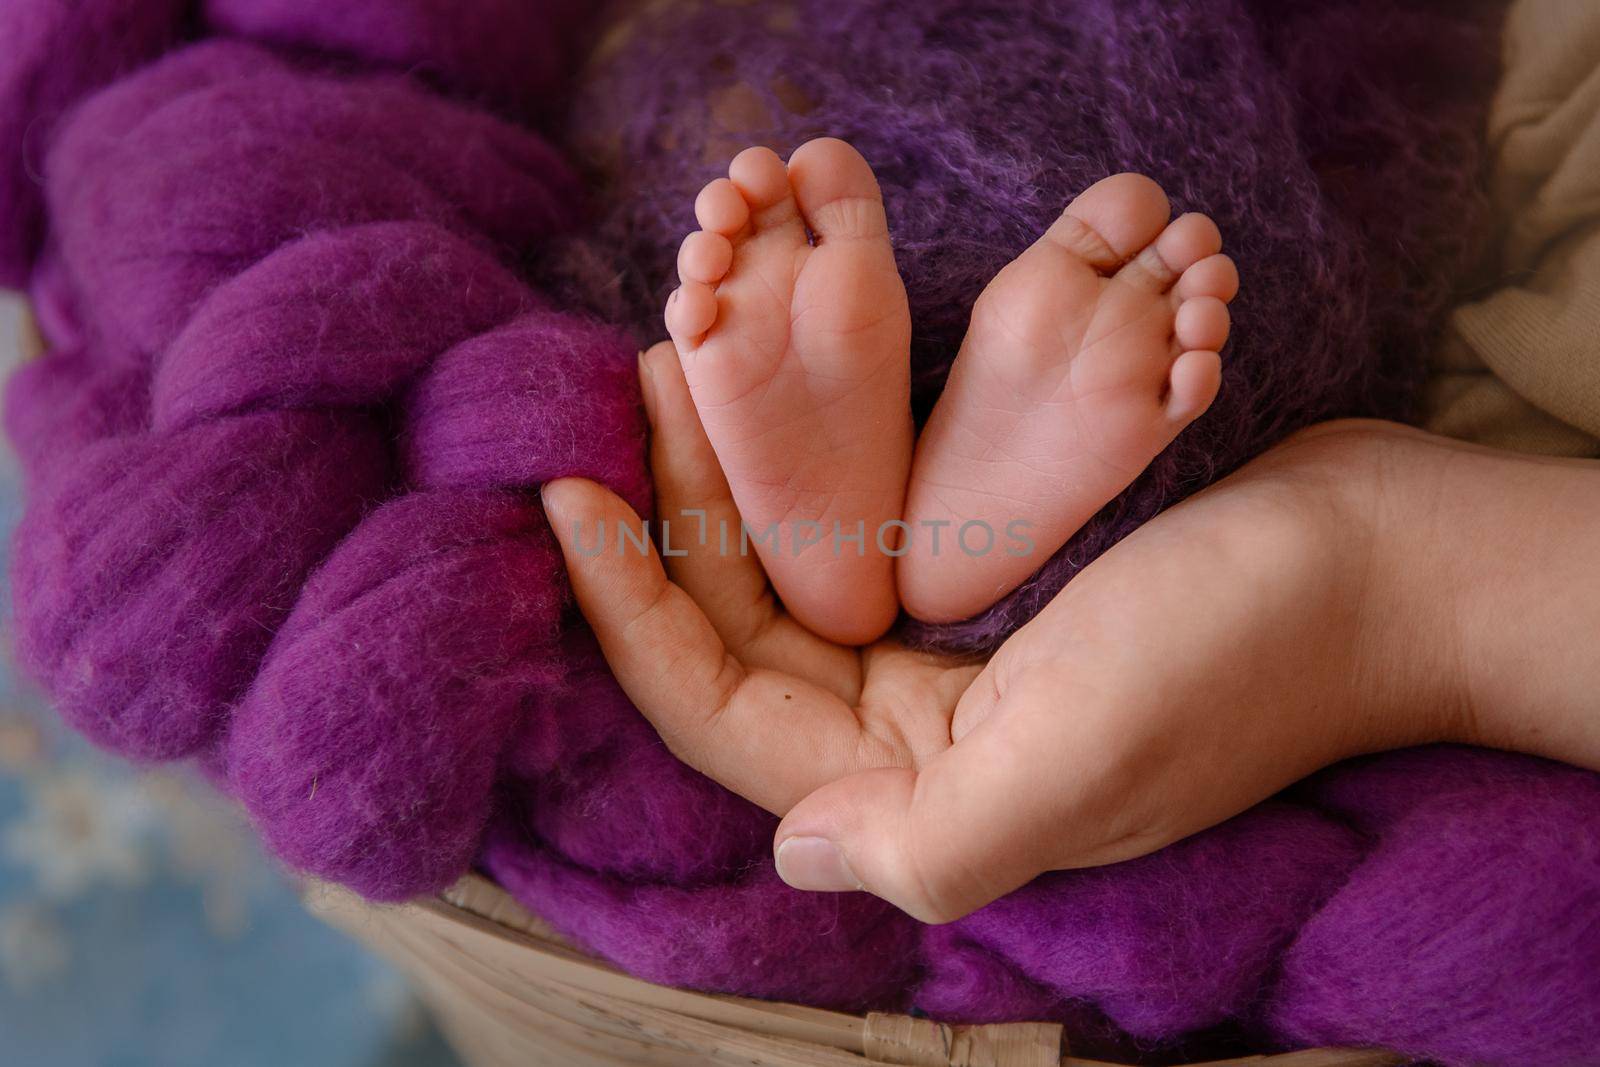 newborn baby feet and hands of parents by Kai_Grim